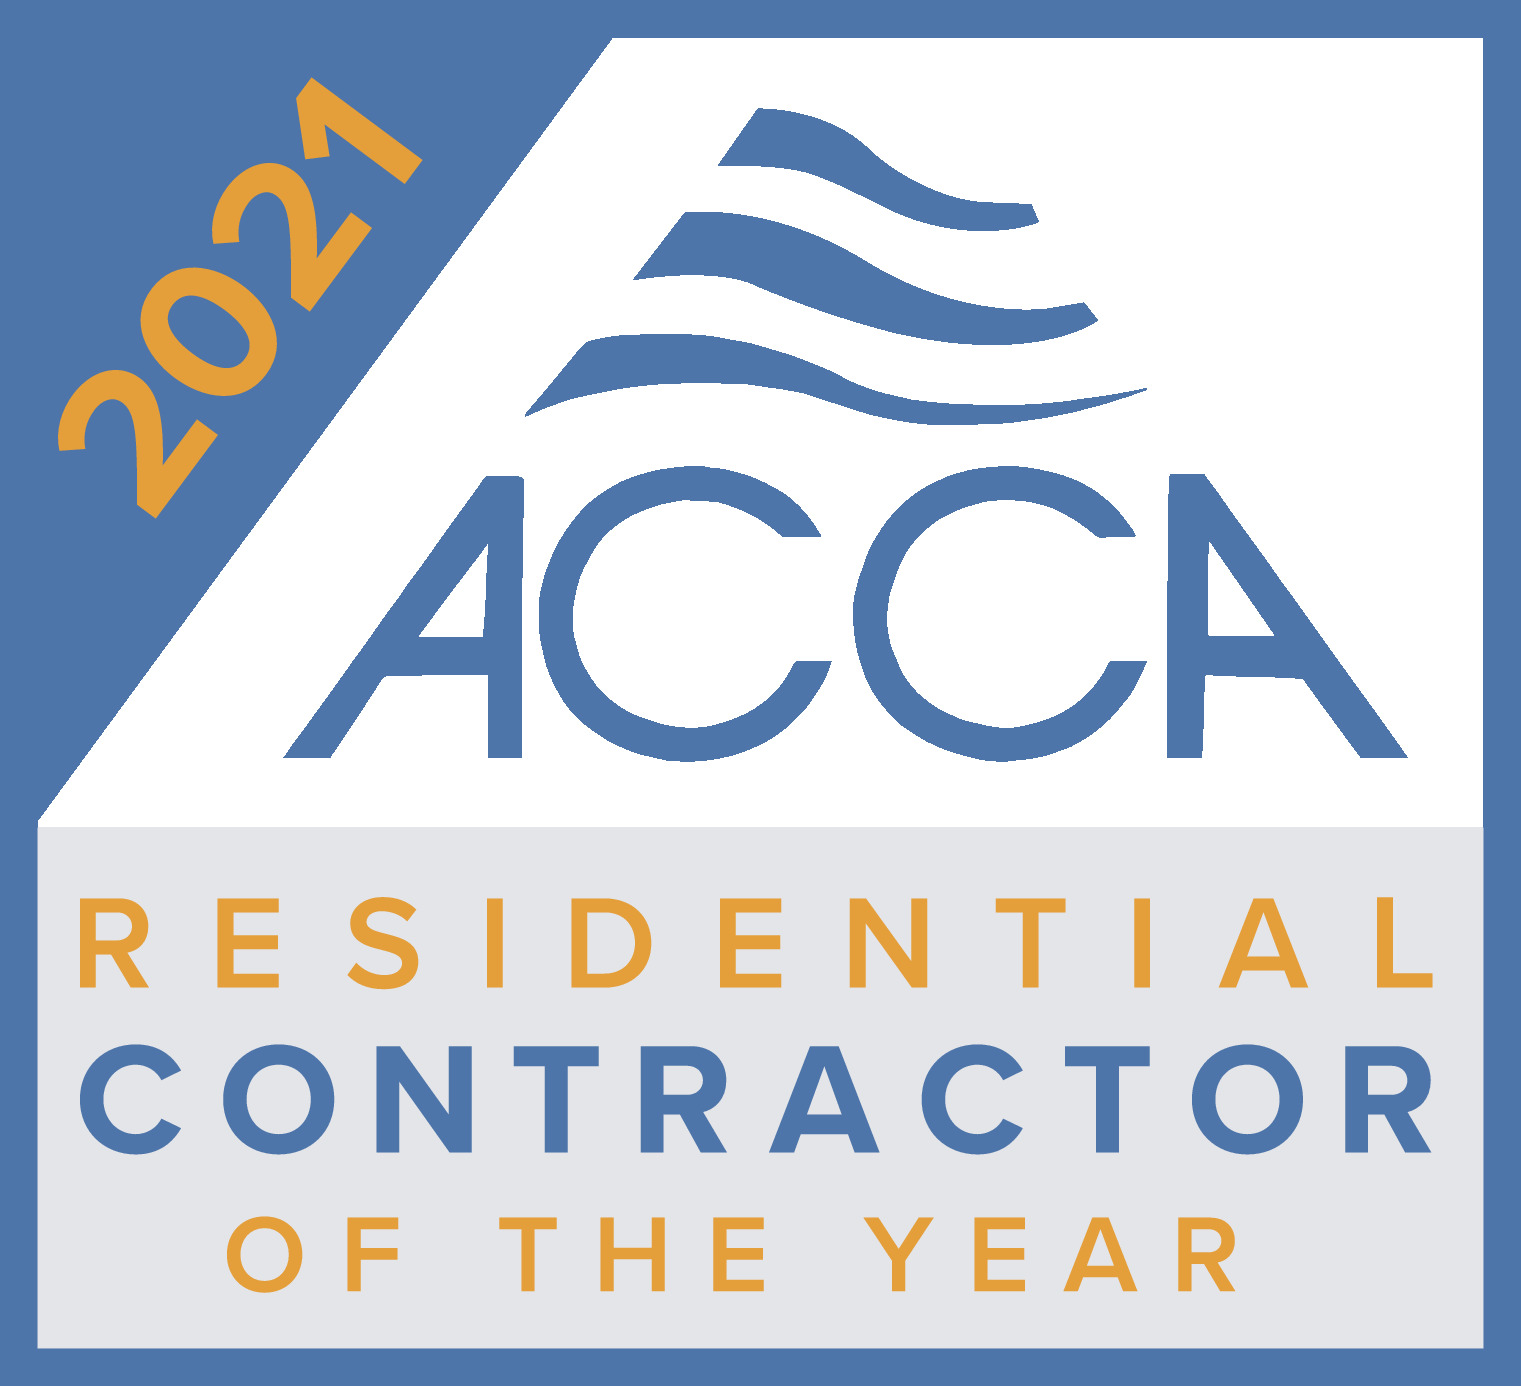 ACCA Residential Contractor of the Year Award - 2021